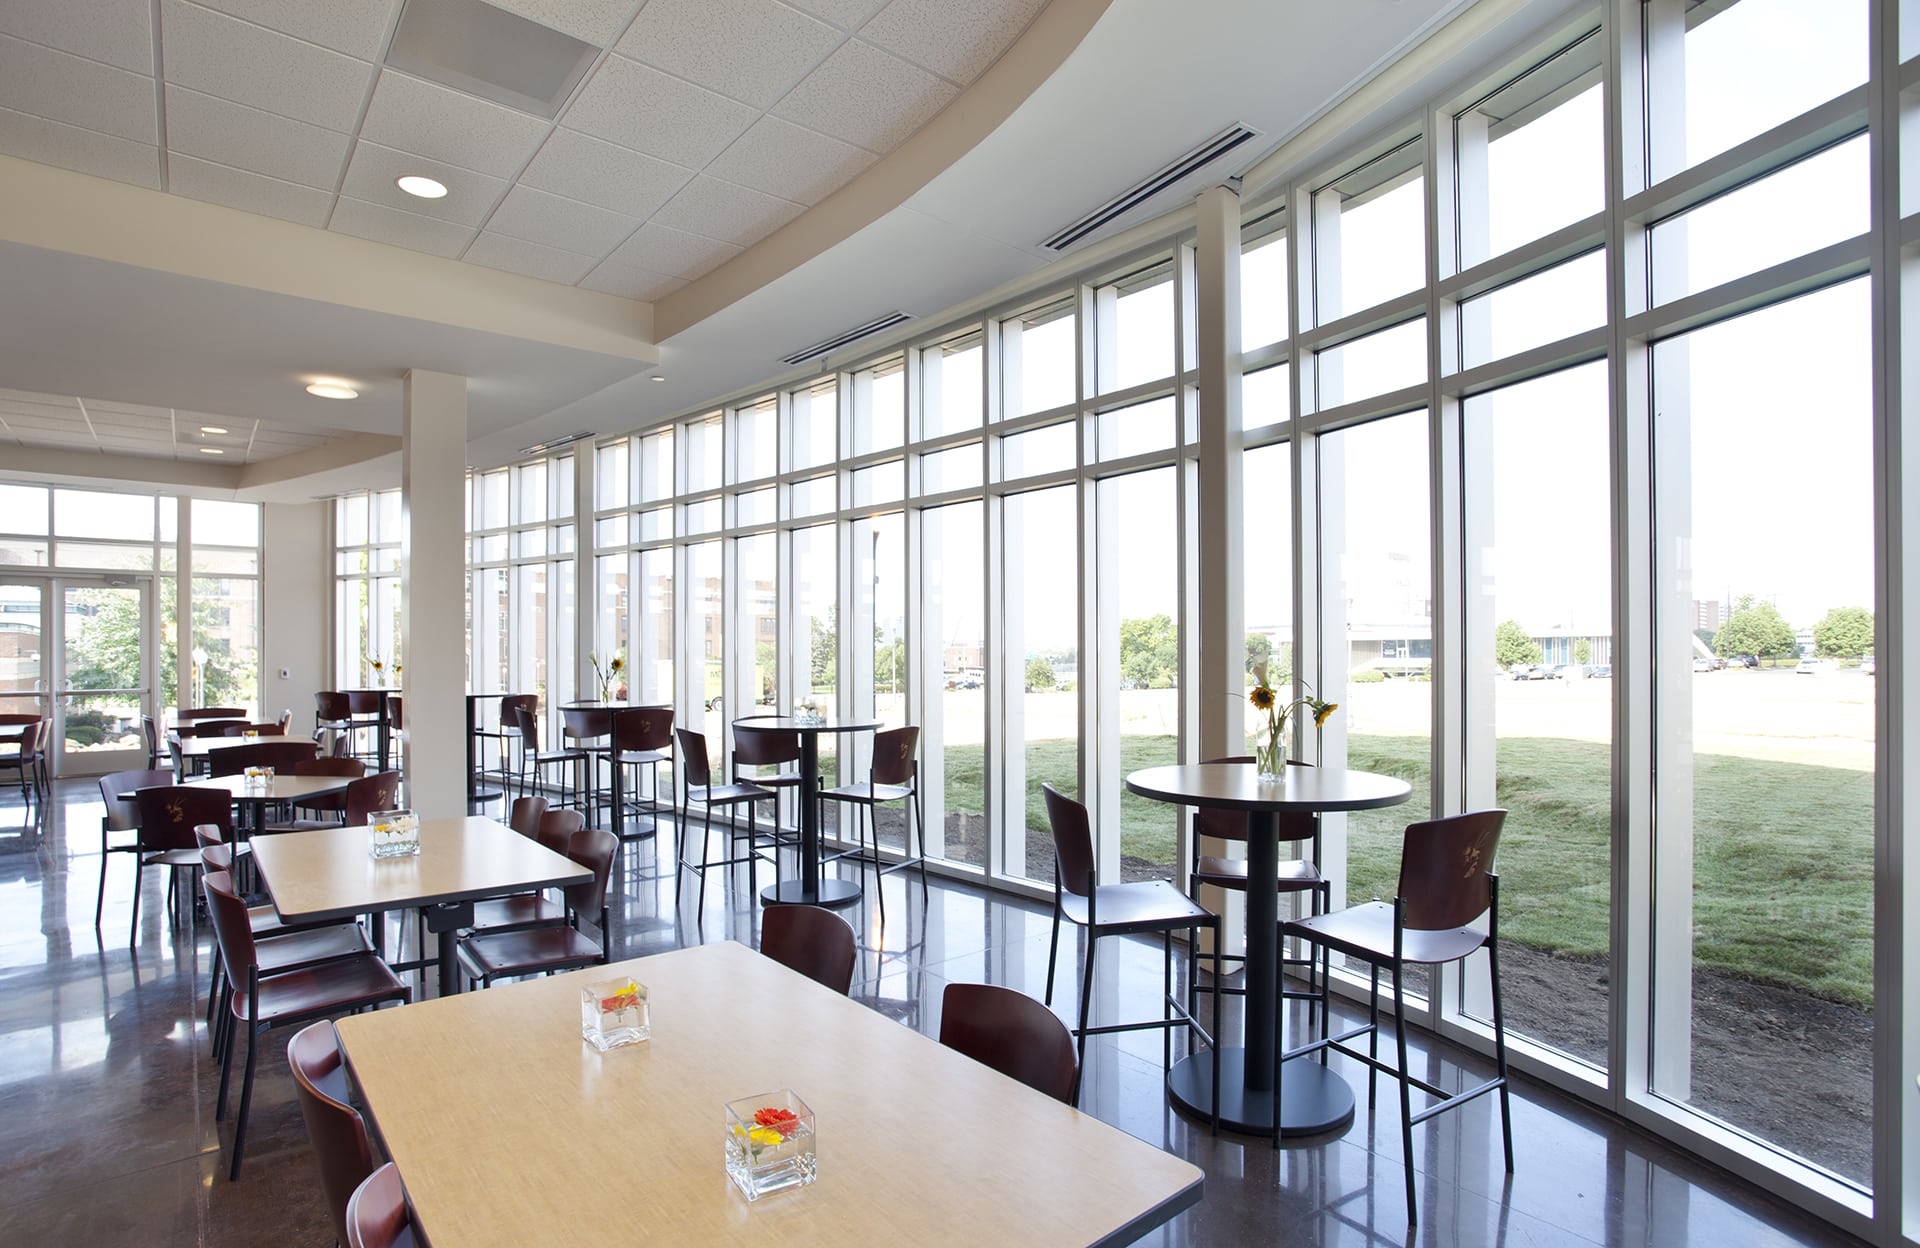 harris stowe state university dining area designed by trivers architectural firm